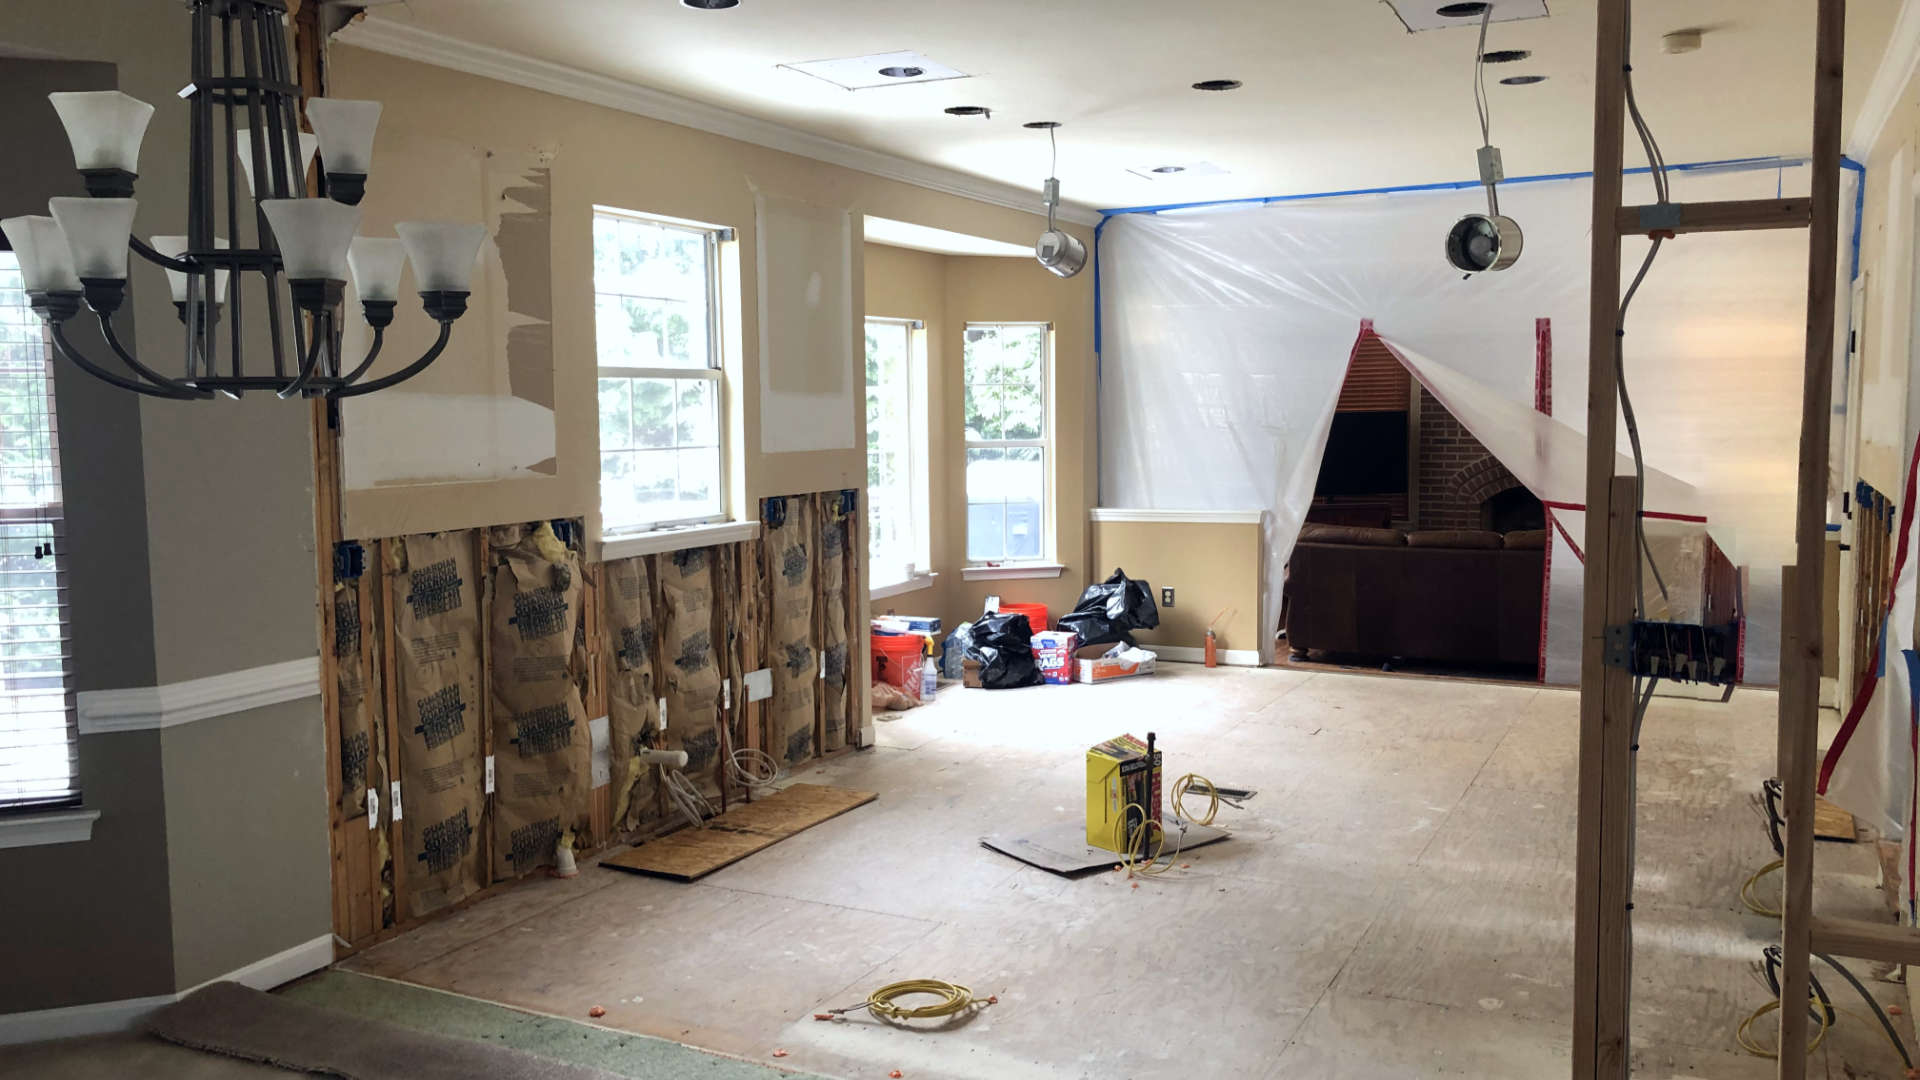 Chris's parents are in the midst of a significant remodel before moving across the country — seeing his parents' kitchen gutted is motivating for what we might do!